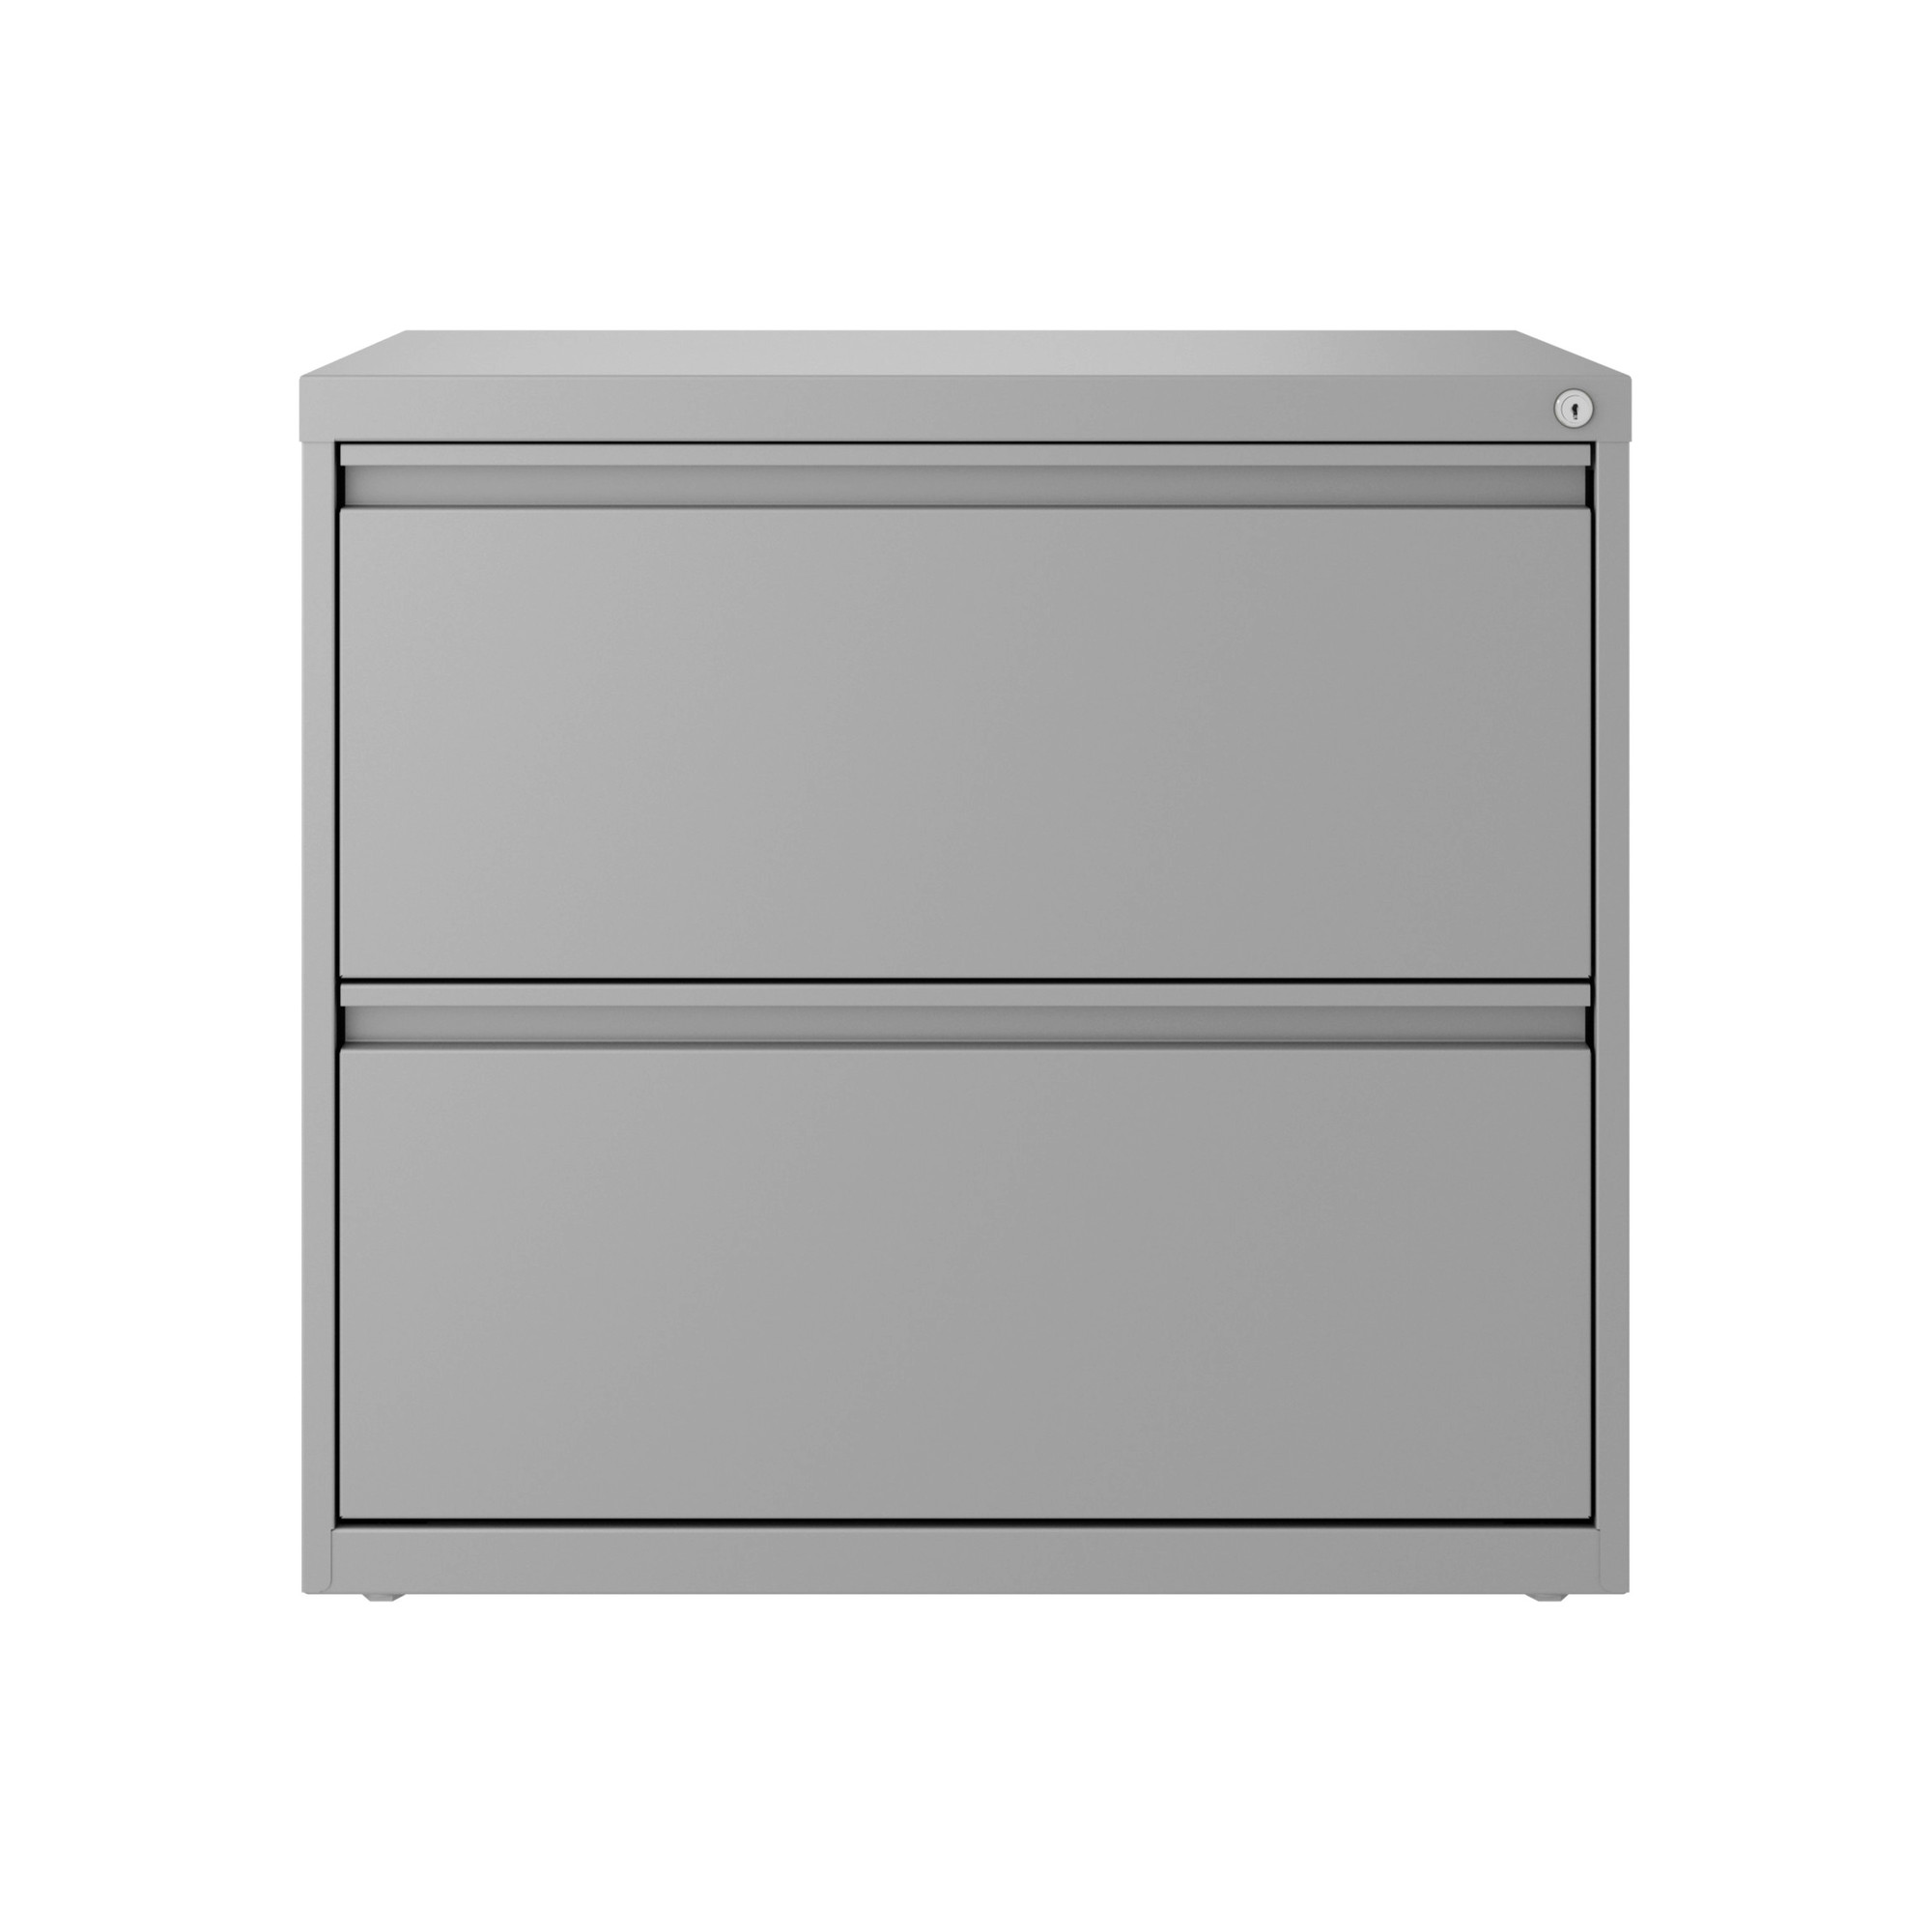 Hirsh Industries, 2 Drawer Lateral 101 File Cabinet, Width 30 in, Depth 17.63 in, Height 27.75 in, Model 24083